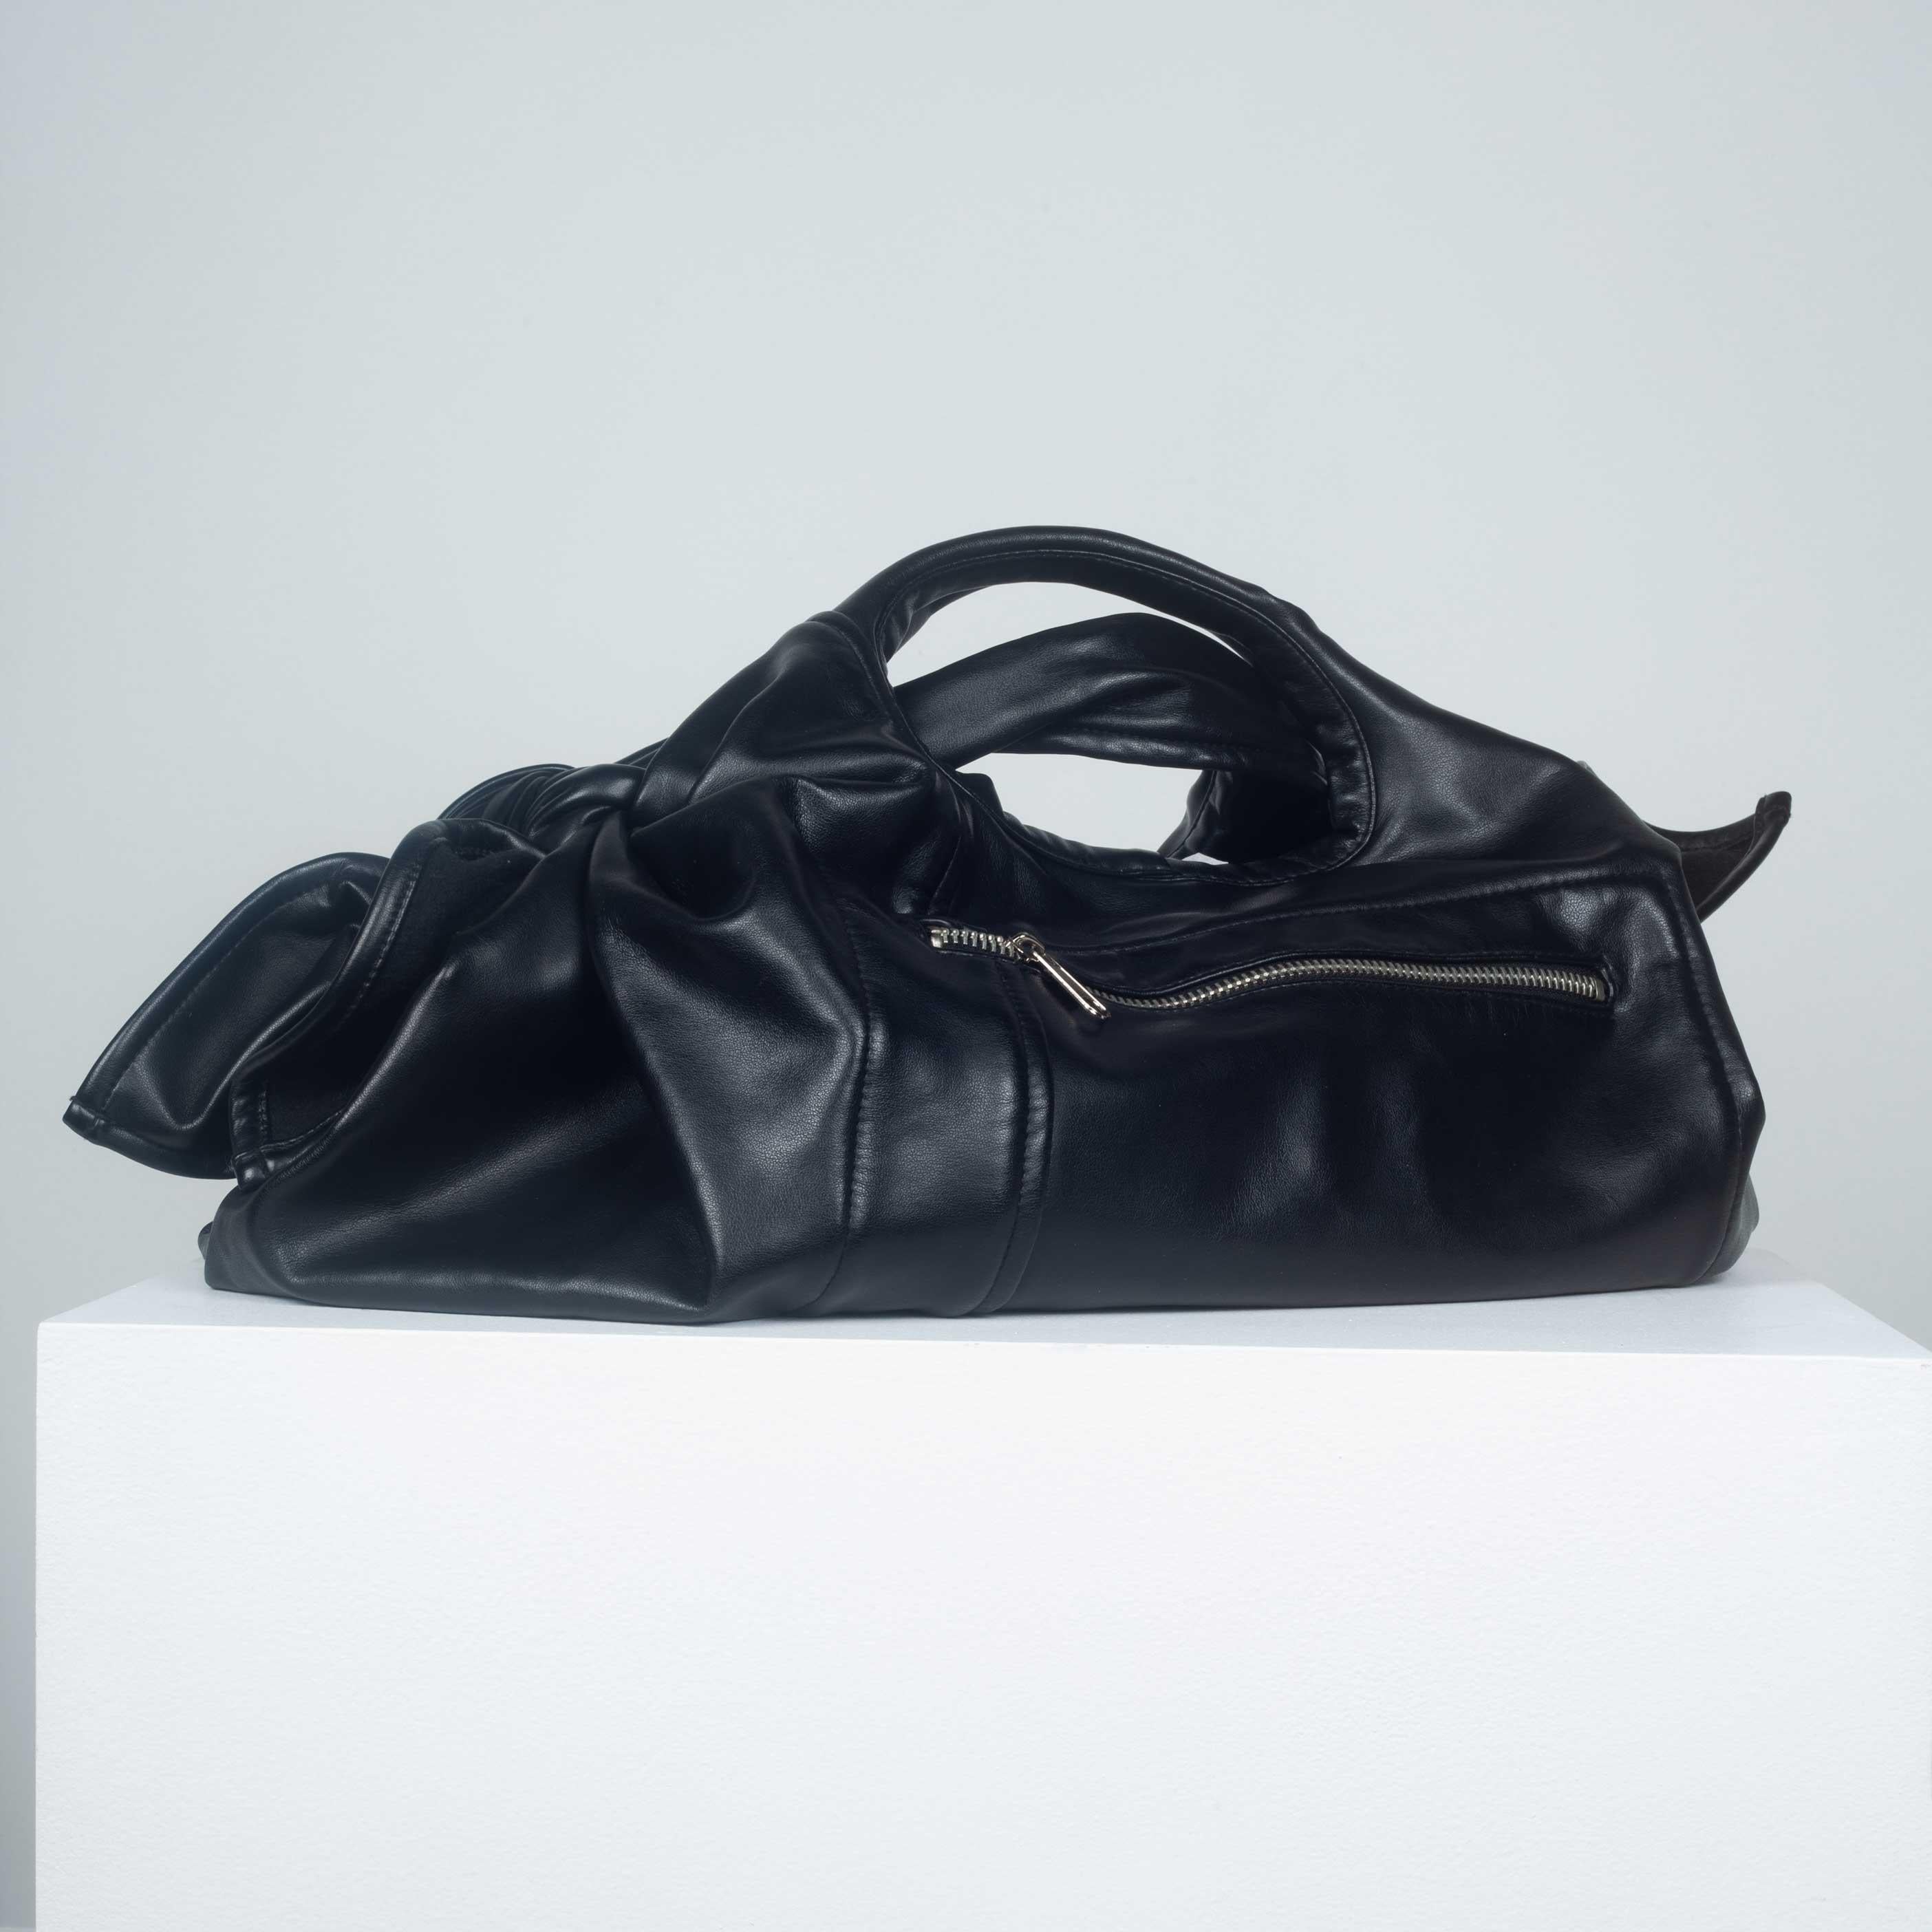 Comme des Garçons black purse from Japan in soft synthetic leather with soft black felt-like lining.
  
YEAR: Unknown
MARKED SIZE: No size marked
FIT: Regular
WIDTH: 8